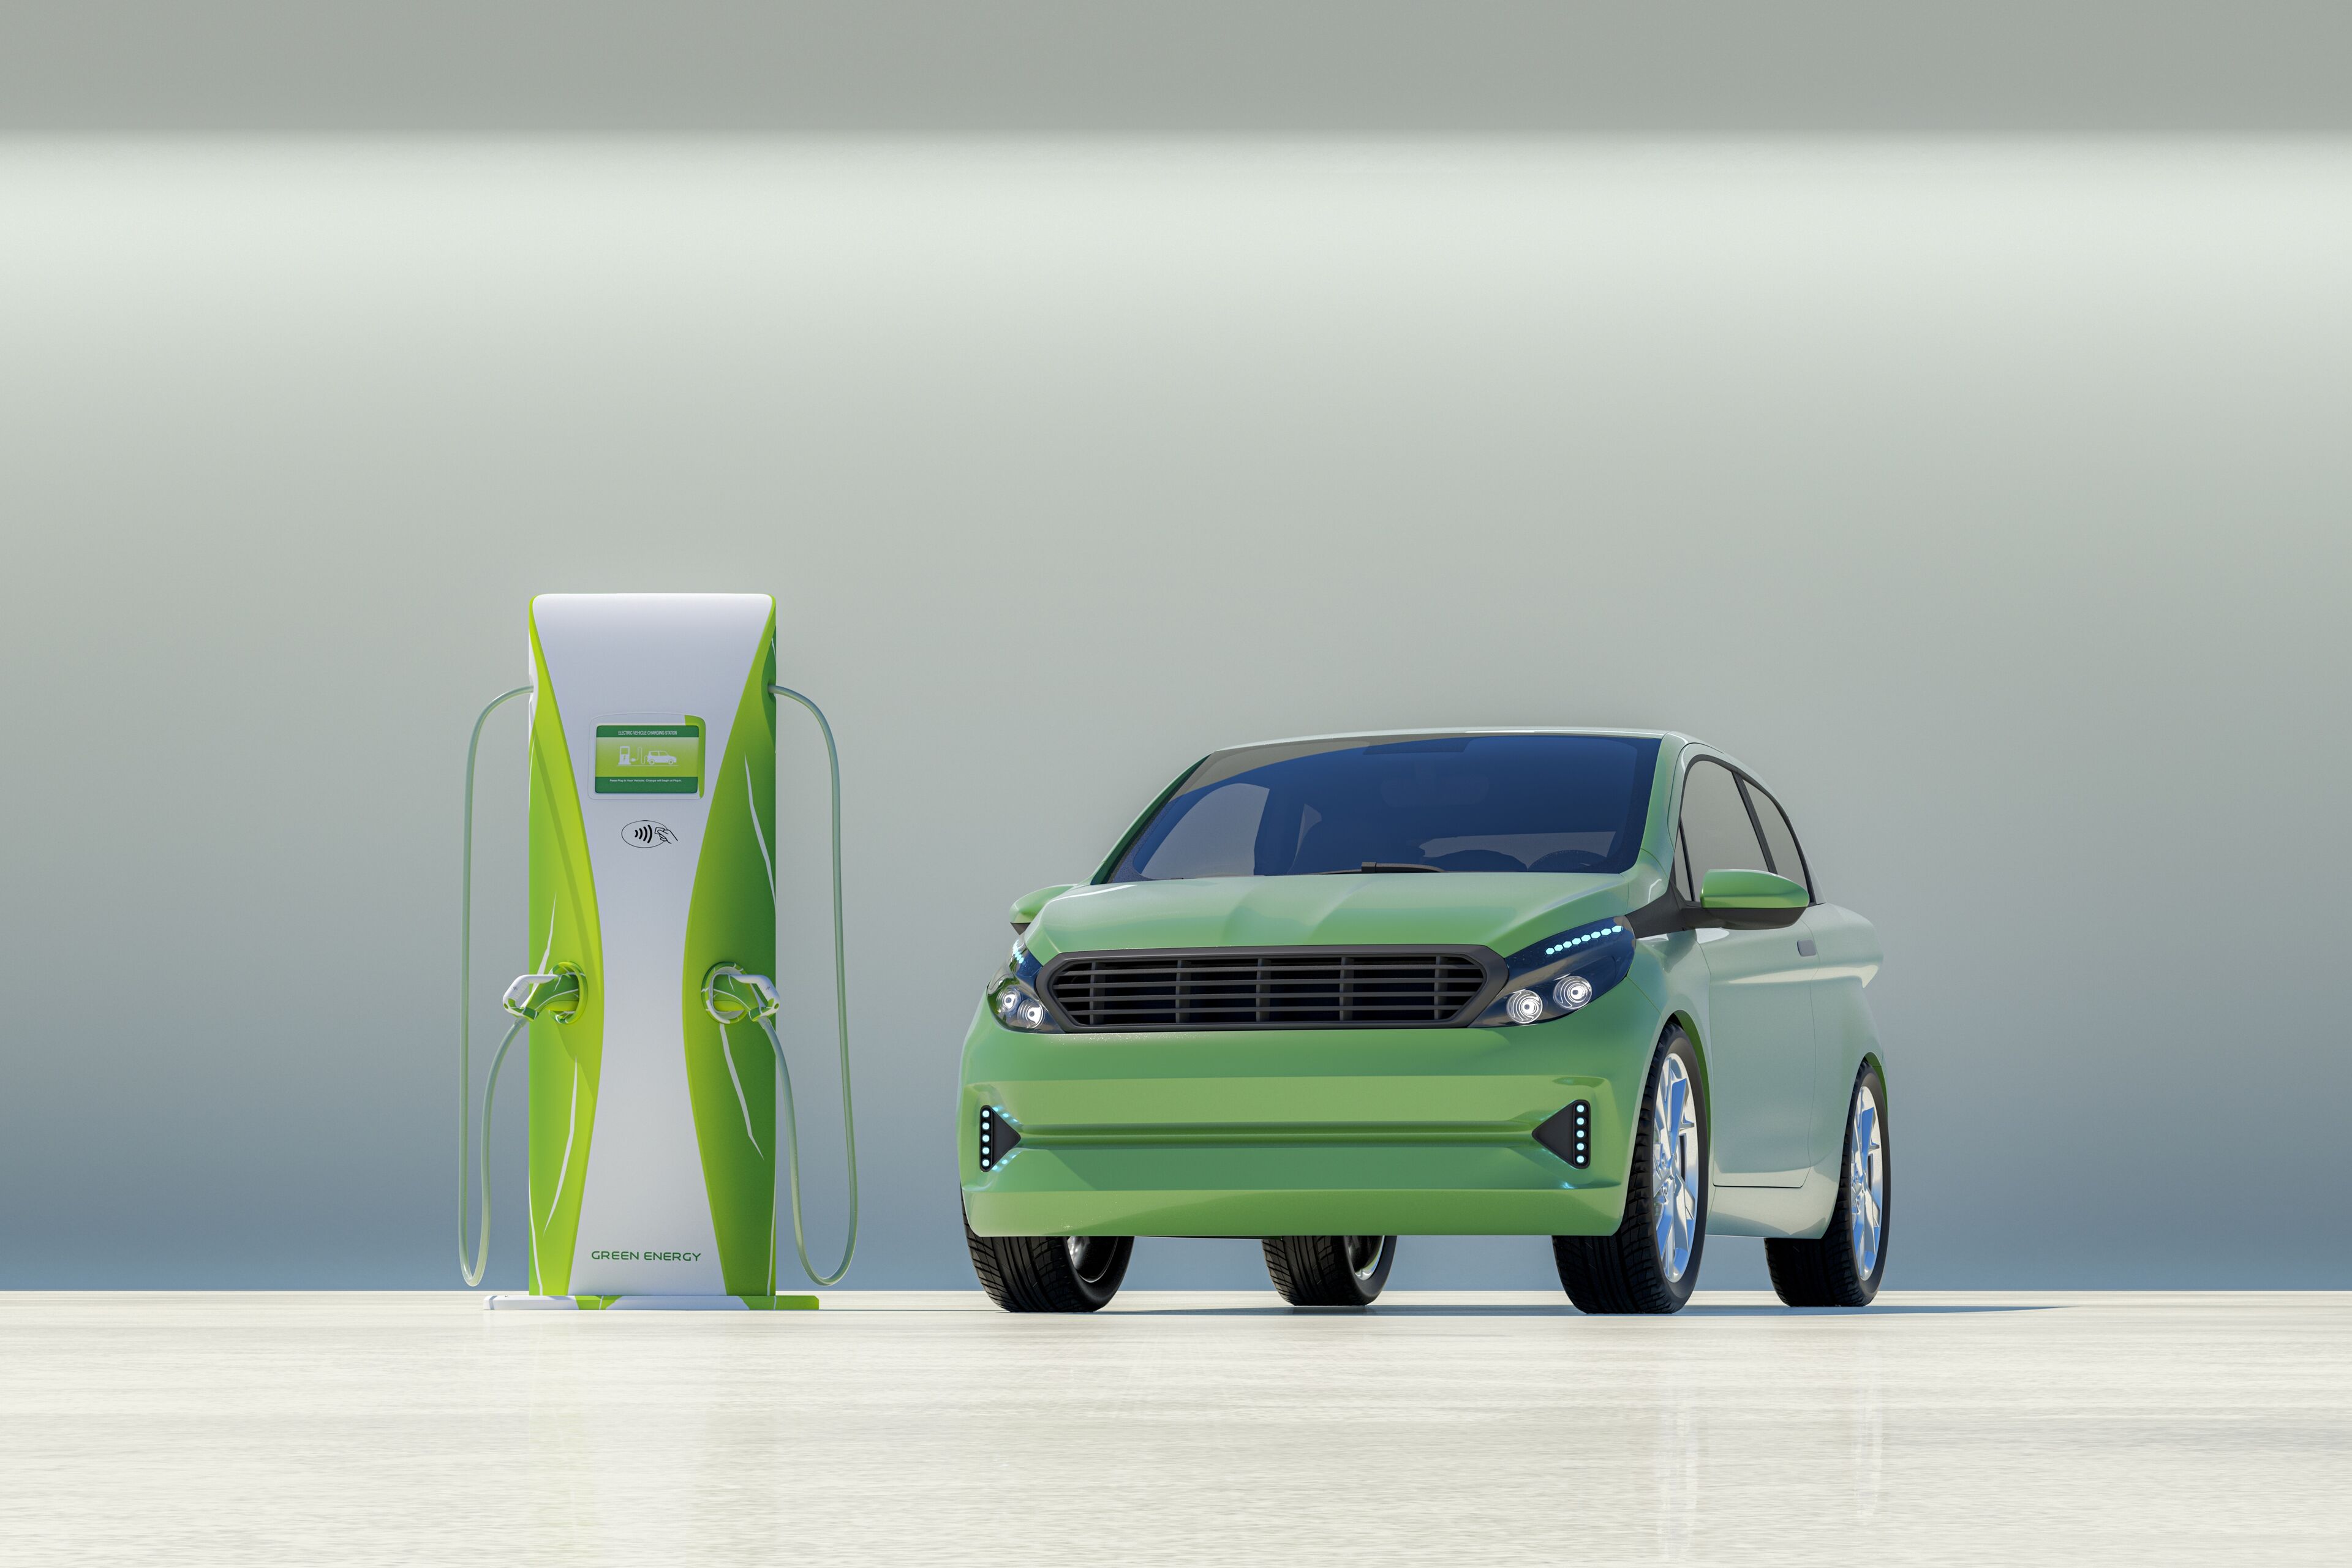 A modern green electric car connected to a vibrant green charging station, symbolizing eco-friendly transportation.